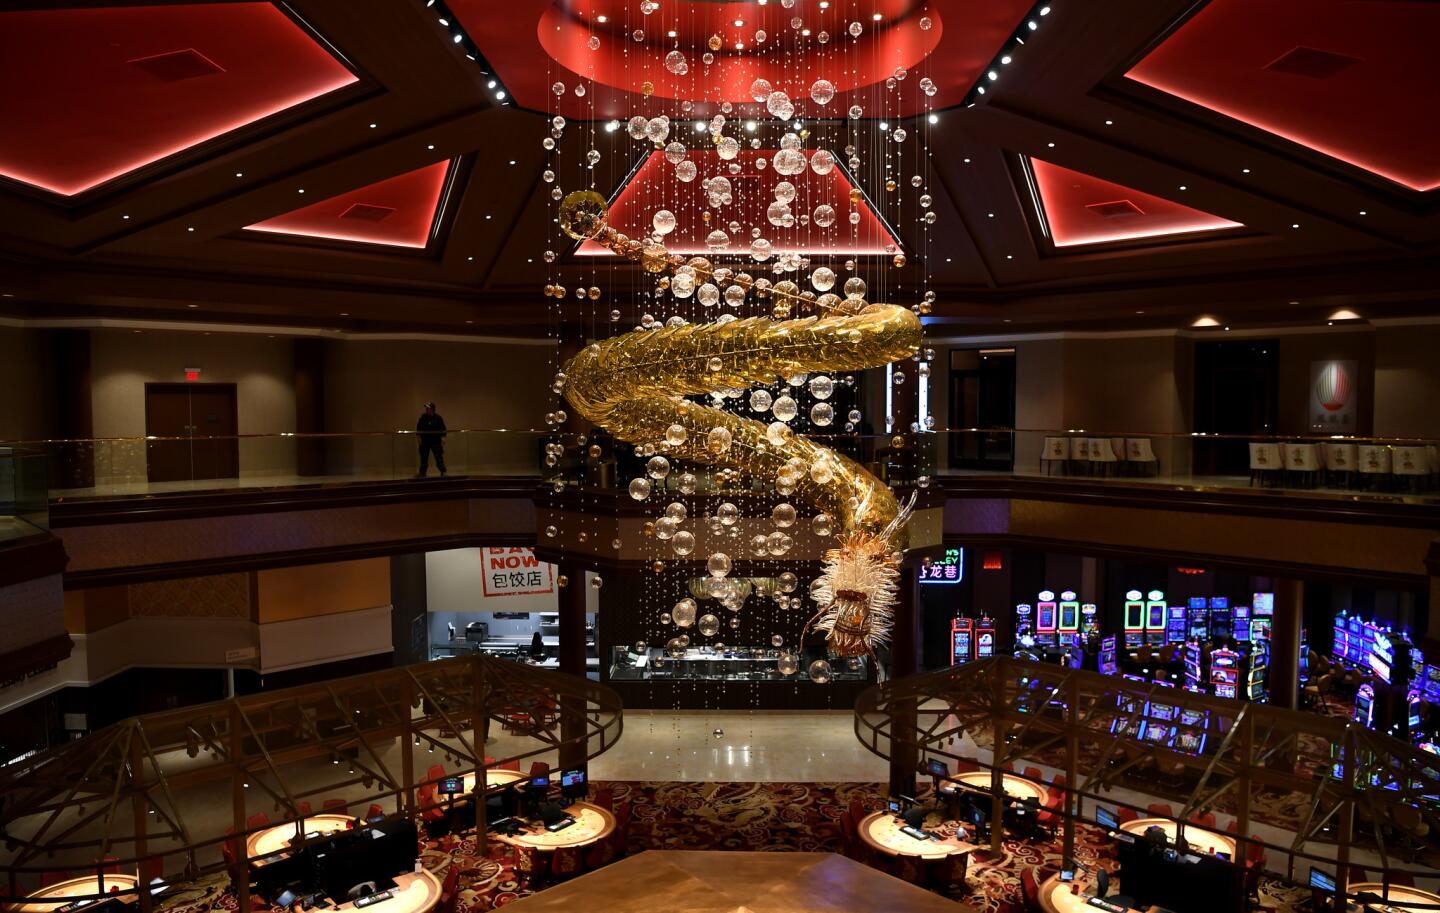 A view of the floor at the Lucky Dragon casino in Las Vegas.